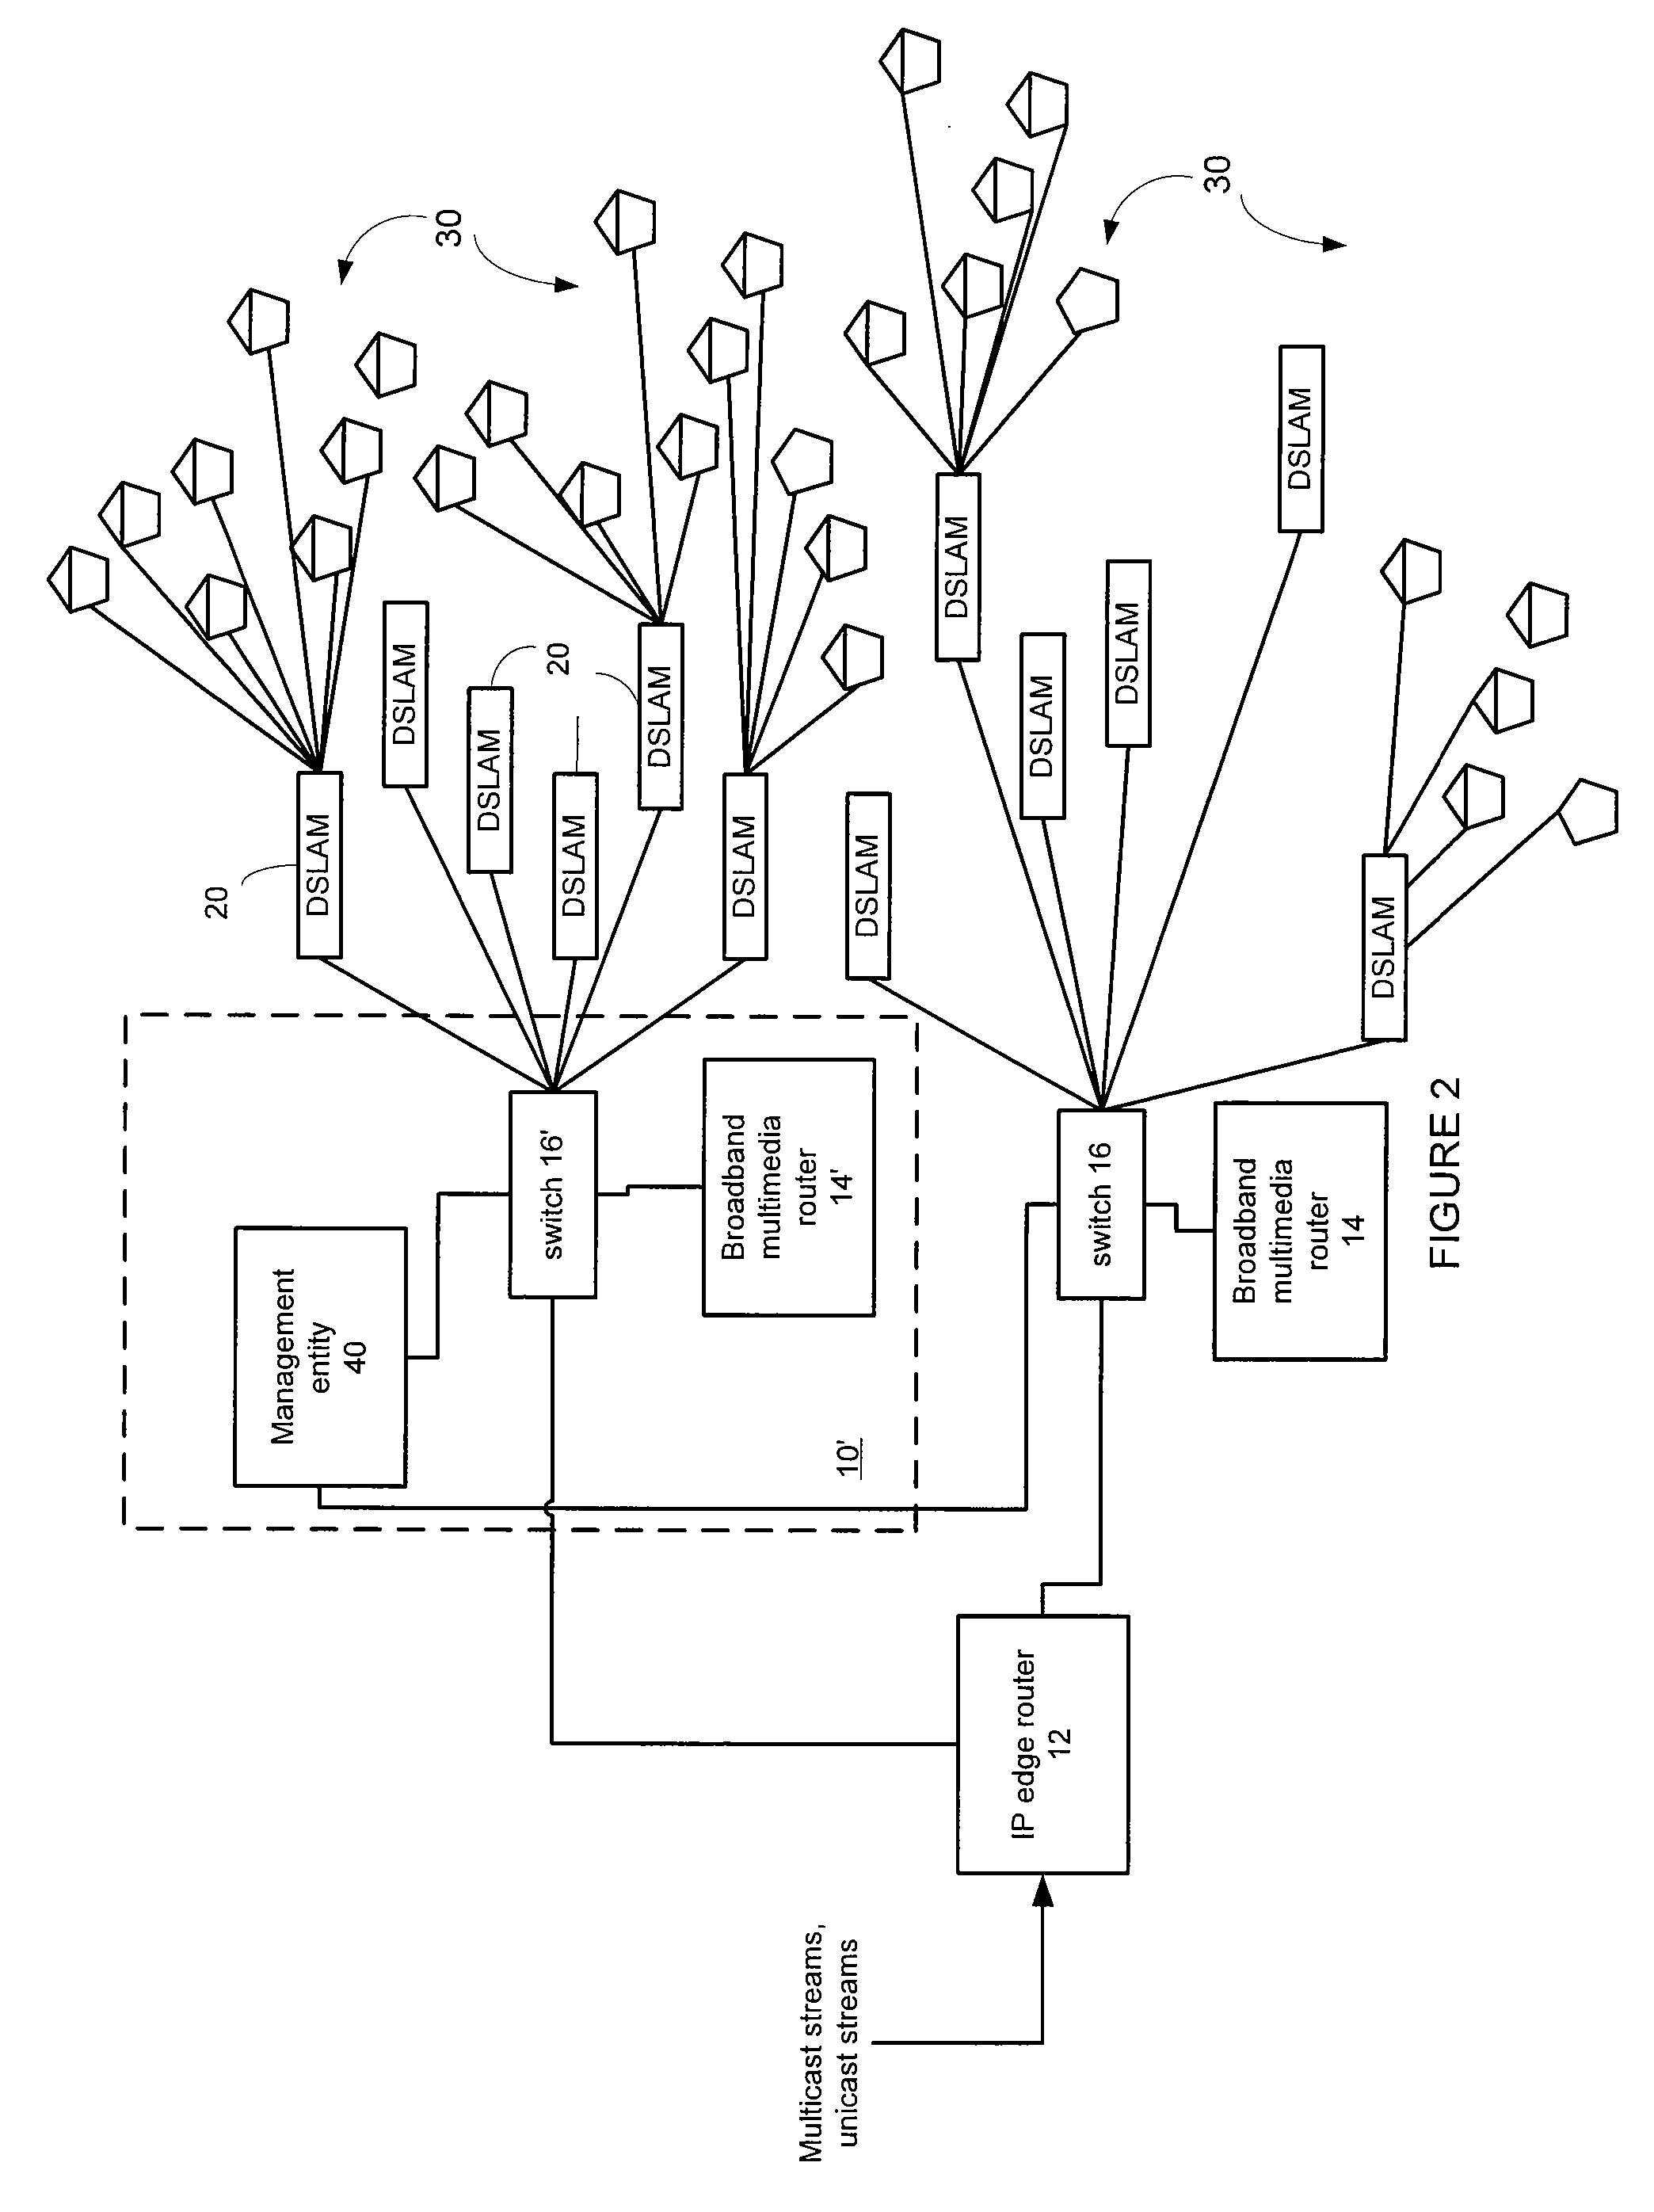 Method and device for providing video, data and voice to end user devices